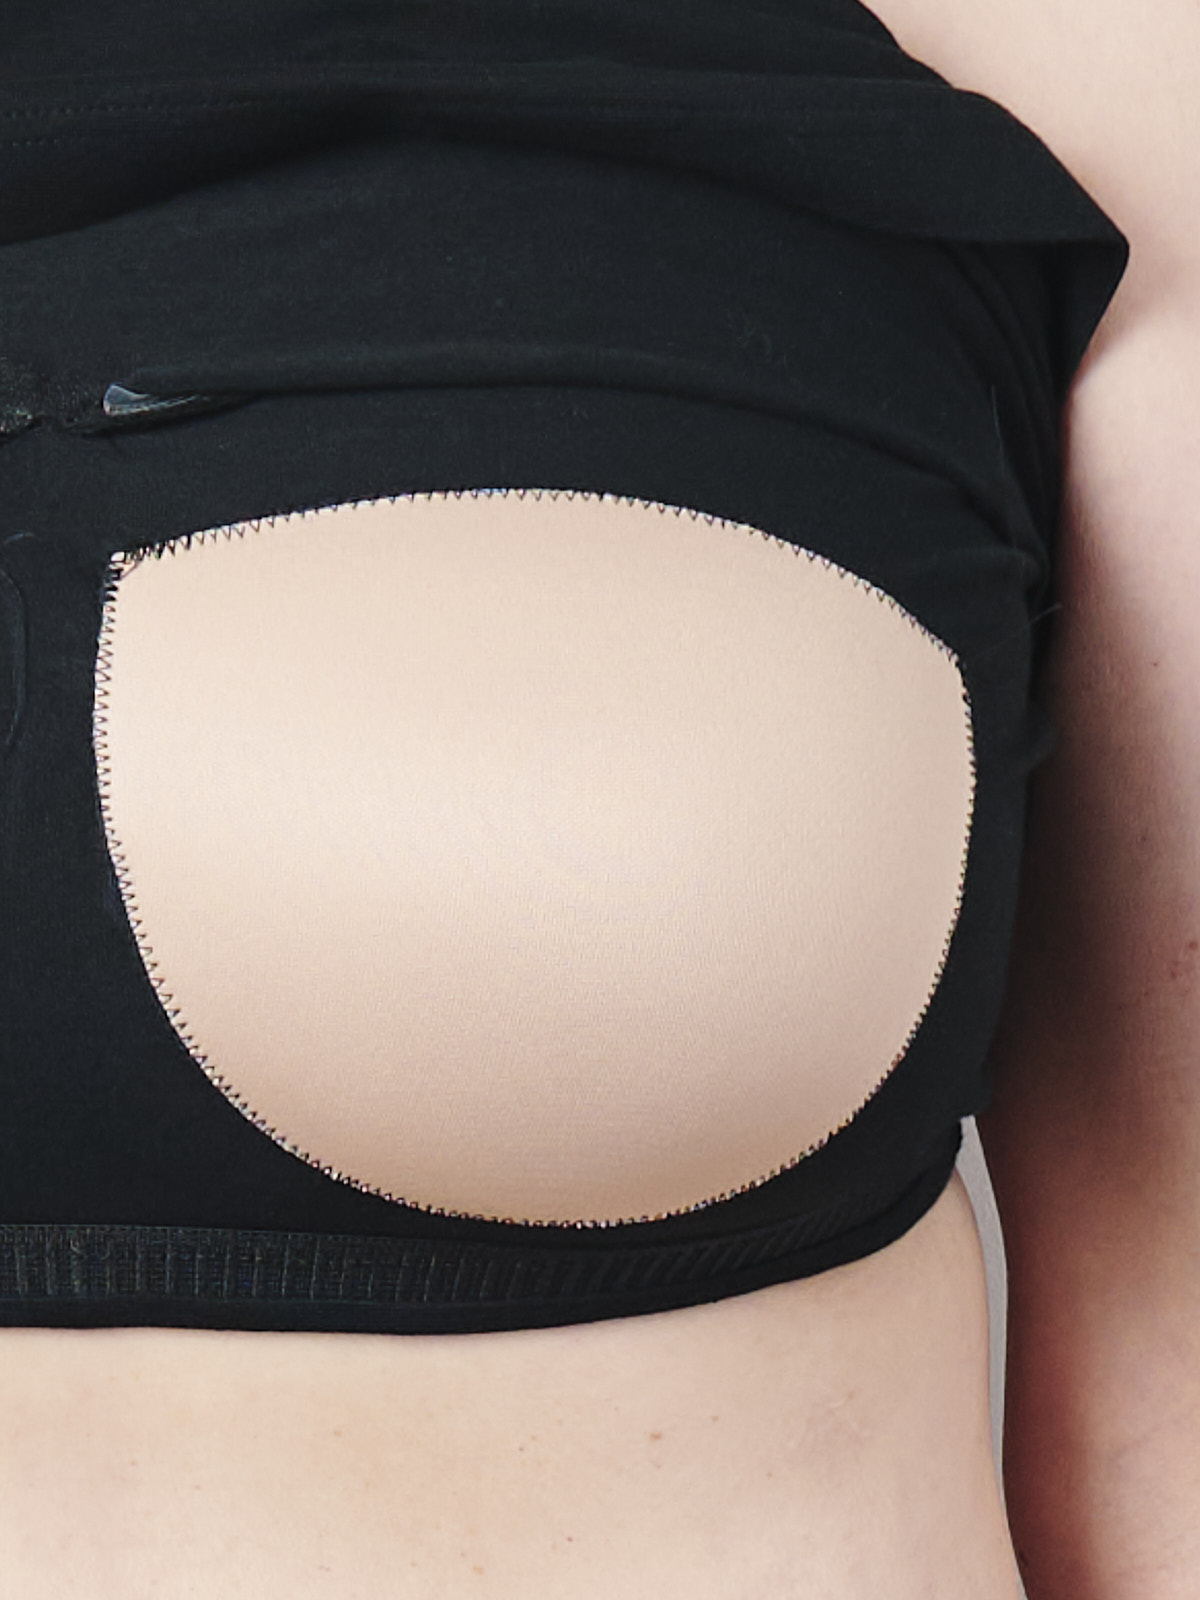 How To Add A Built-in Bra To Clothing?